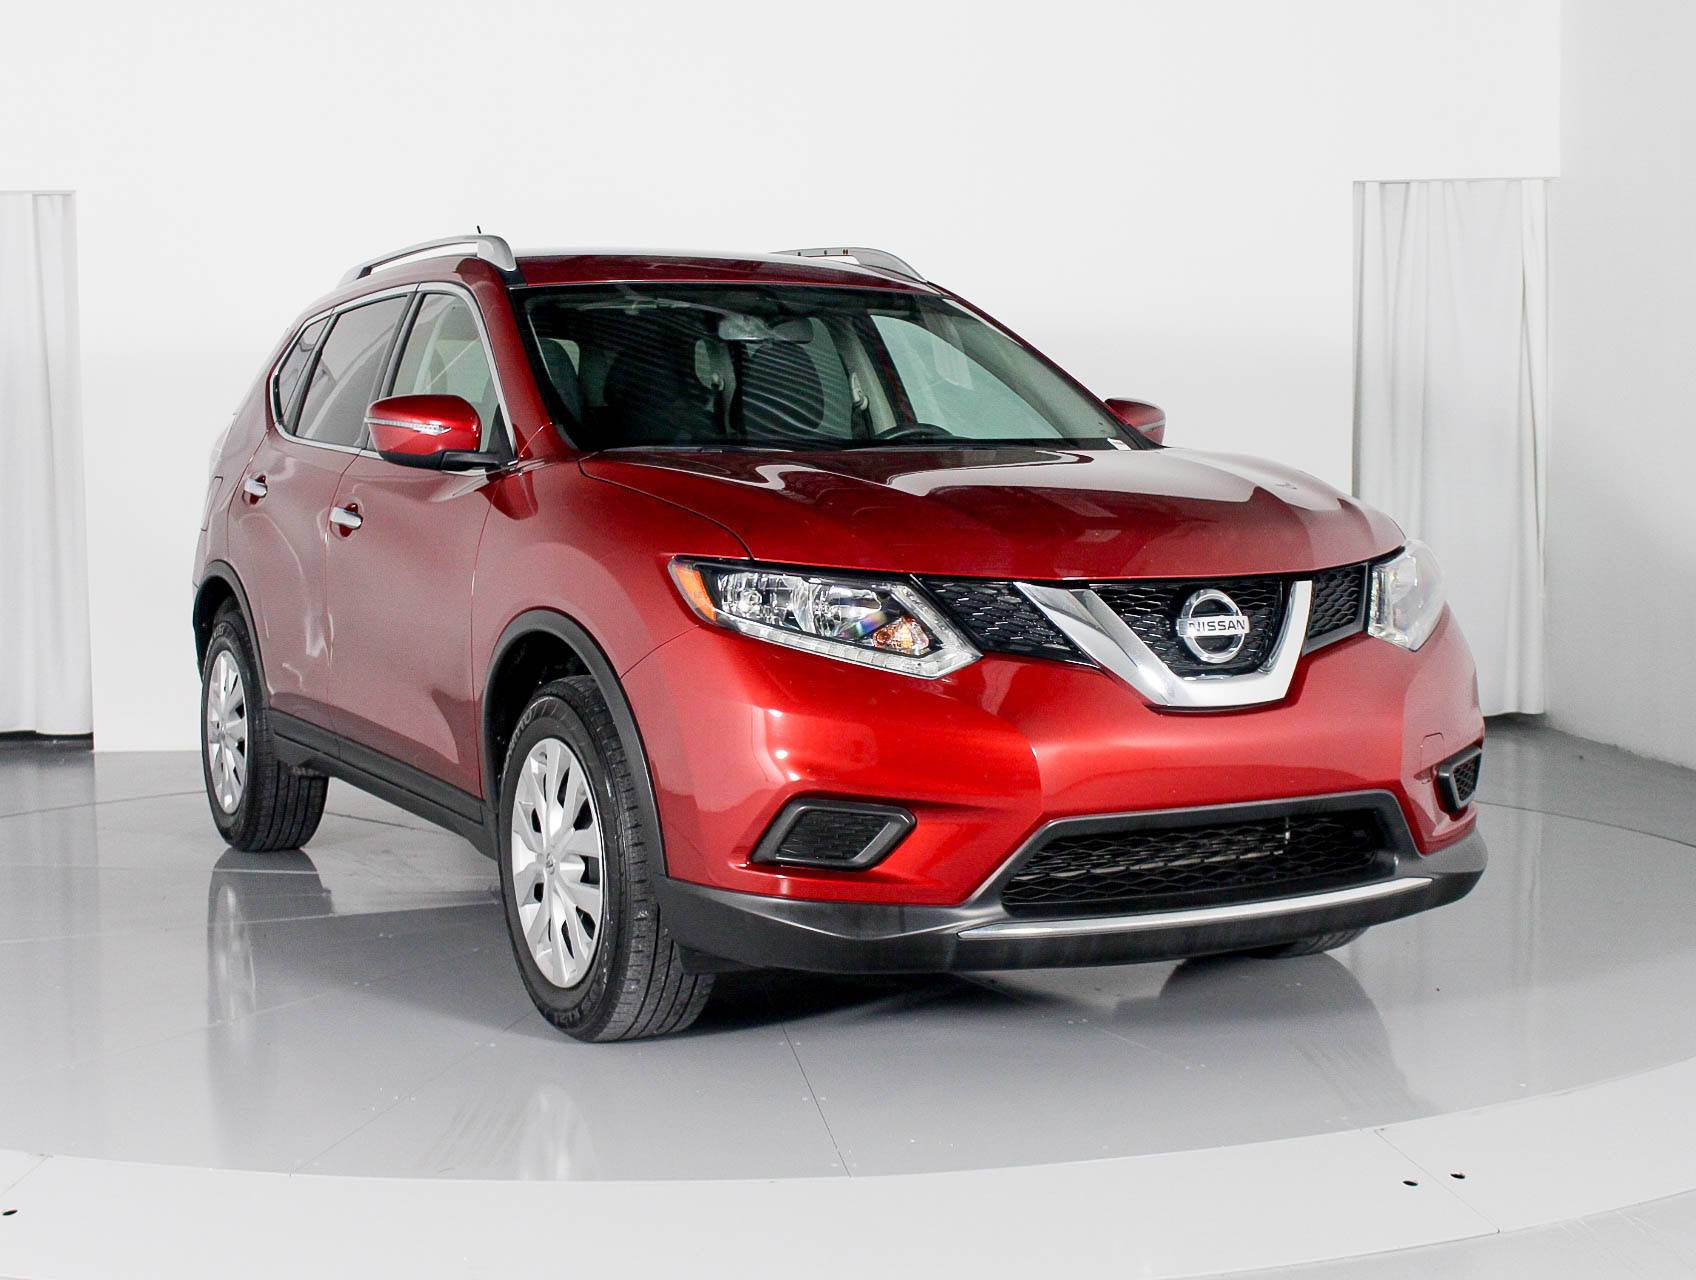 Florida Fine Cars - Used NISSAN ROGUE 2016 MARGATE S 